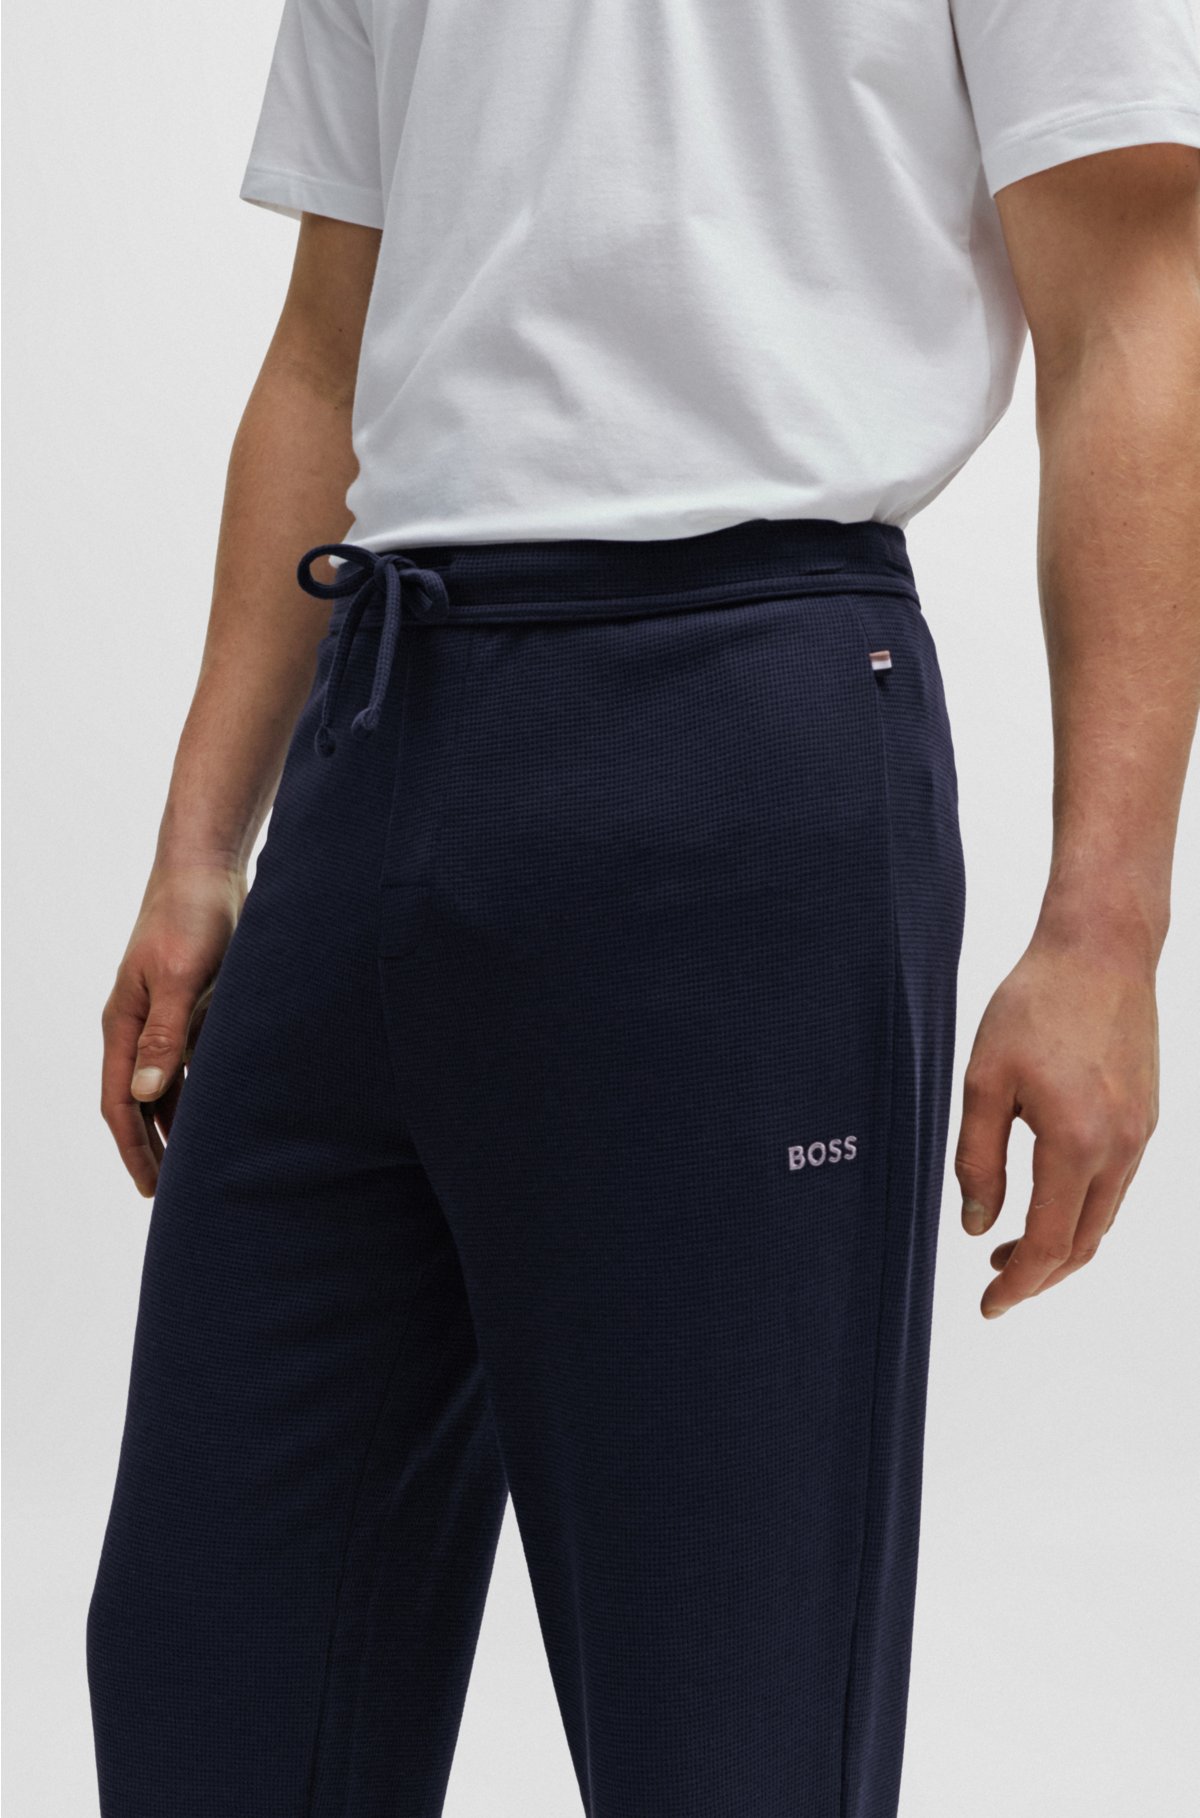 BOSS - Cotton-blend pyjama bottoms with embroidered logo